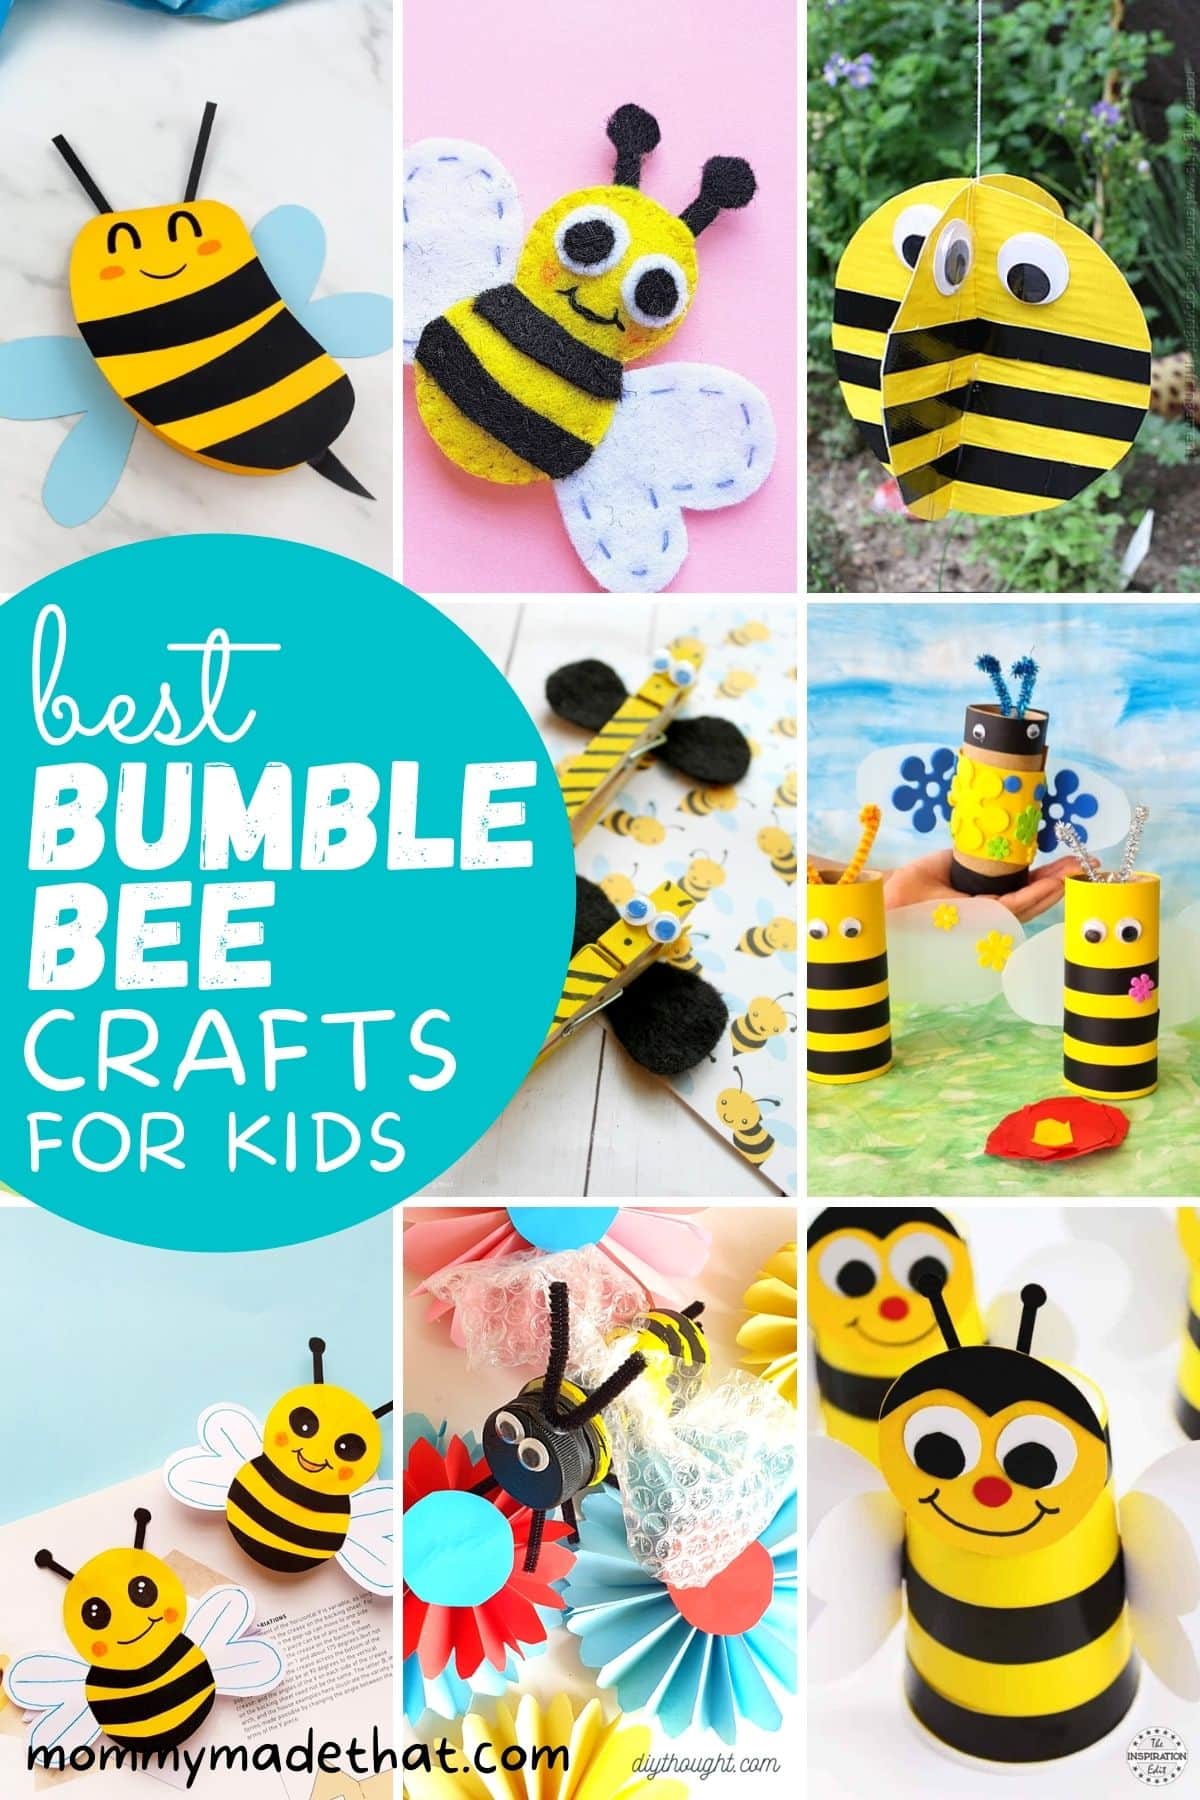 The Best Bumble Bee Crafts Kids Will Love